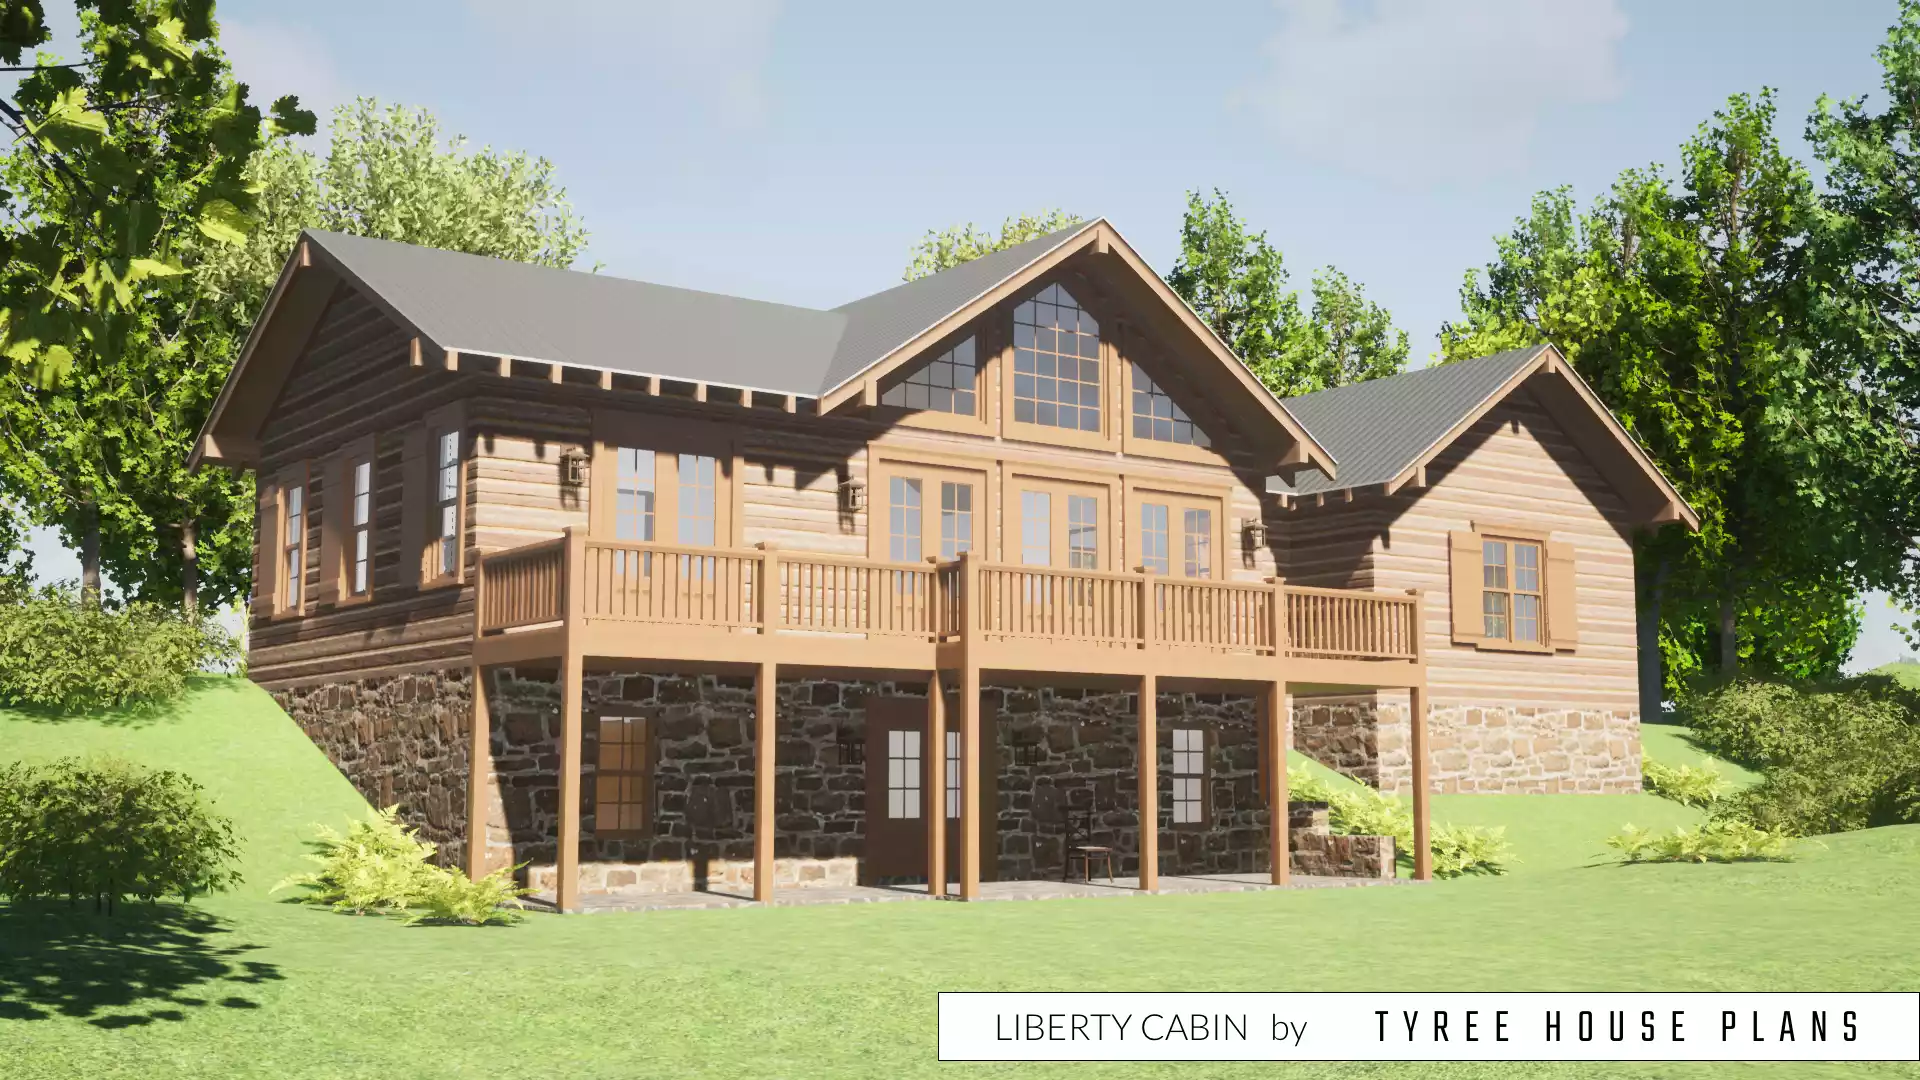 Rear view. Liberty Cabin by Tyree House Plans.